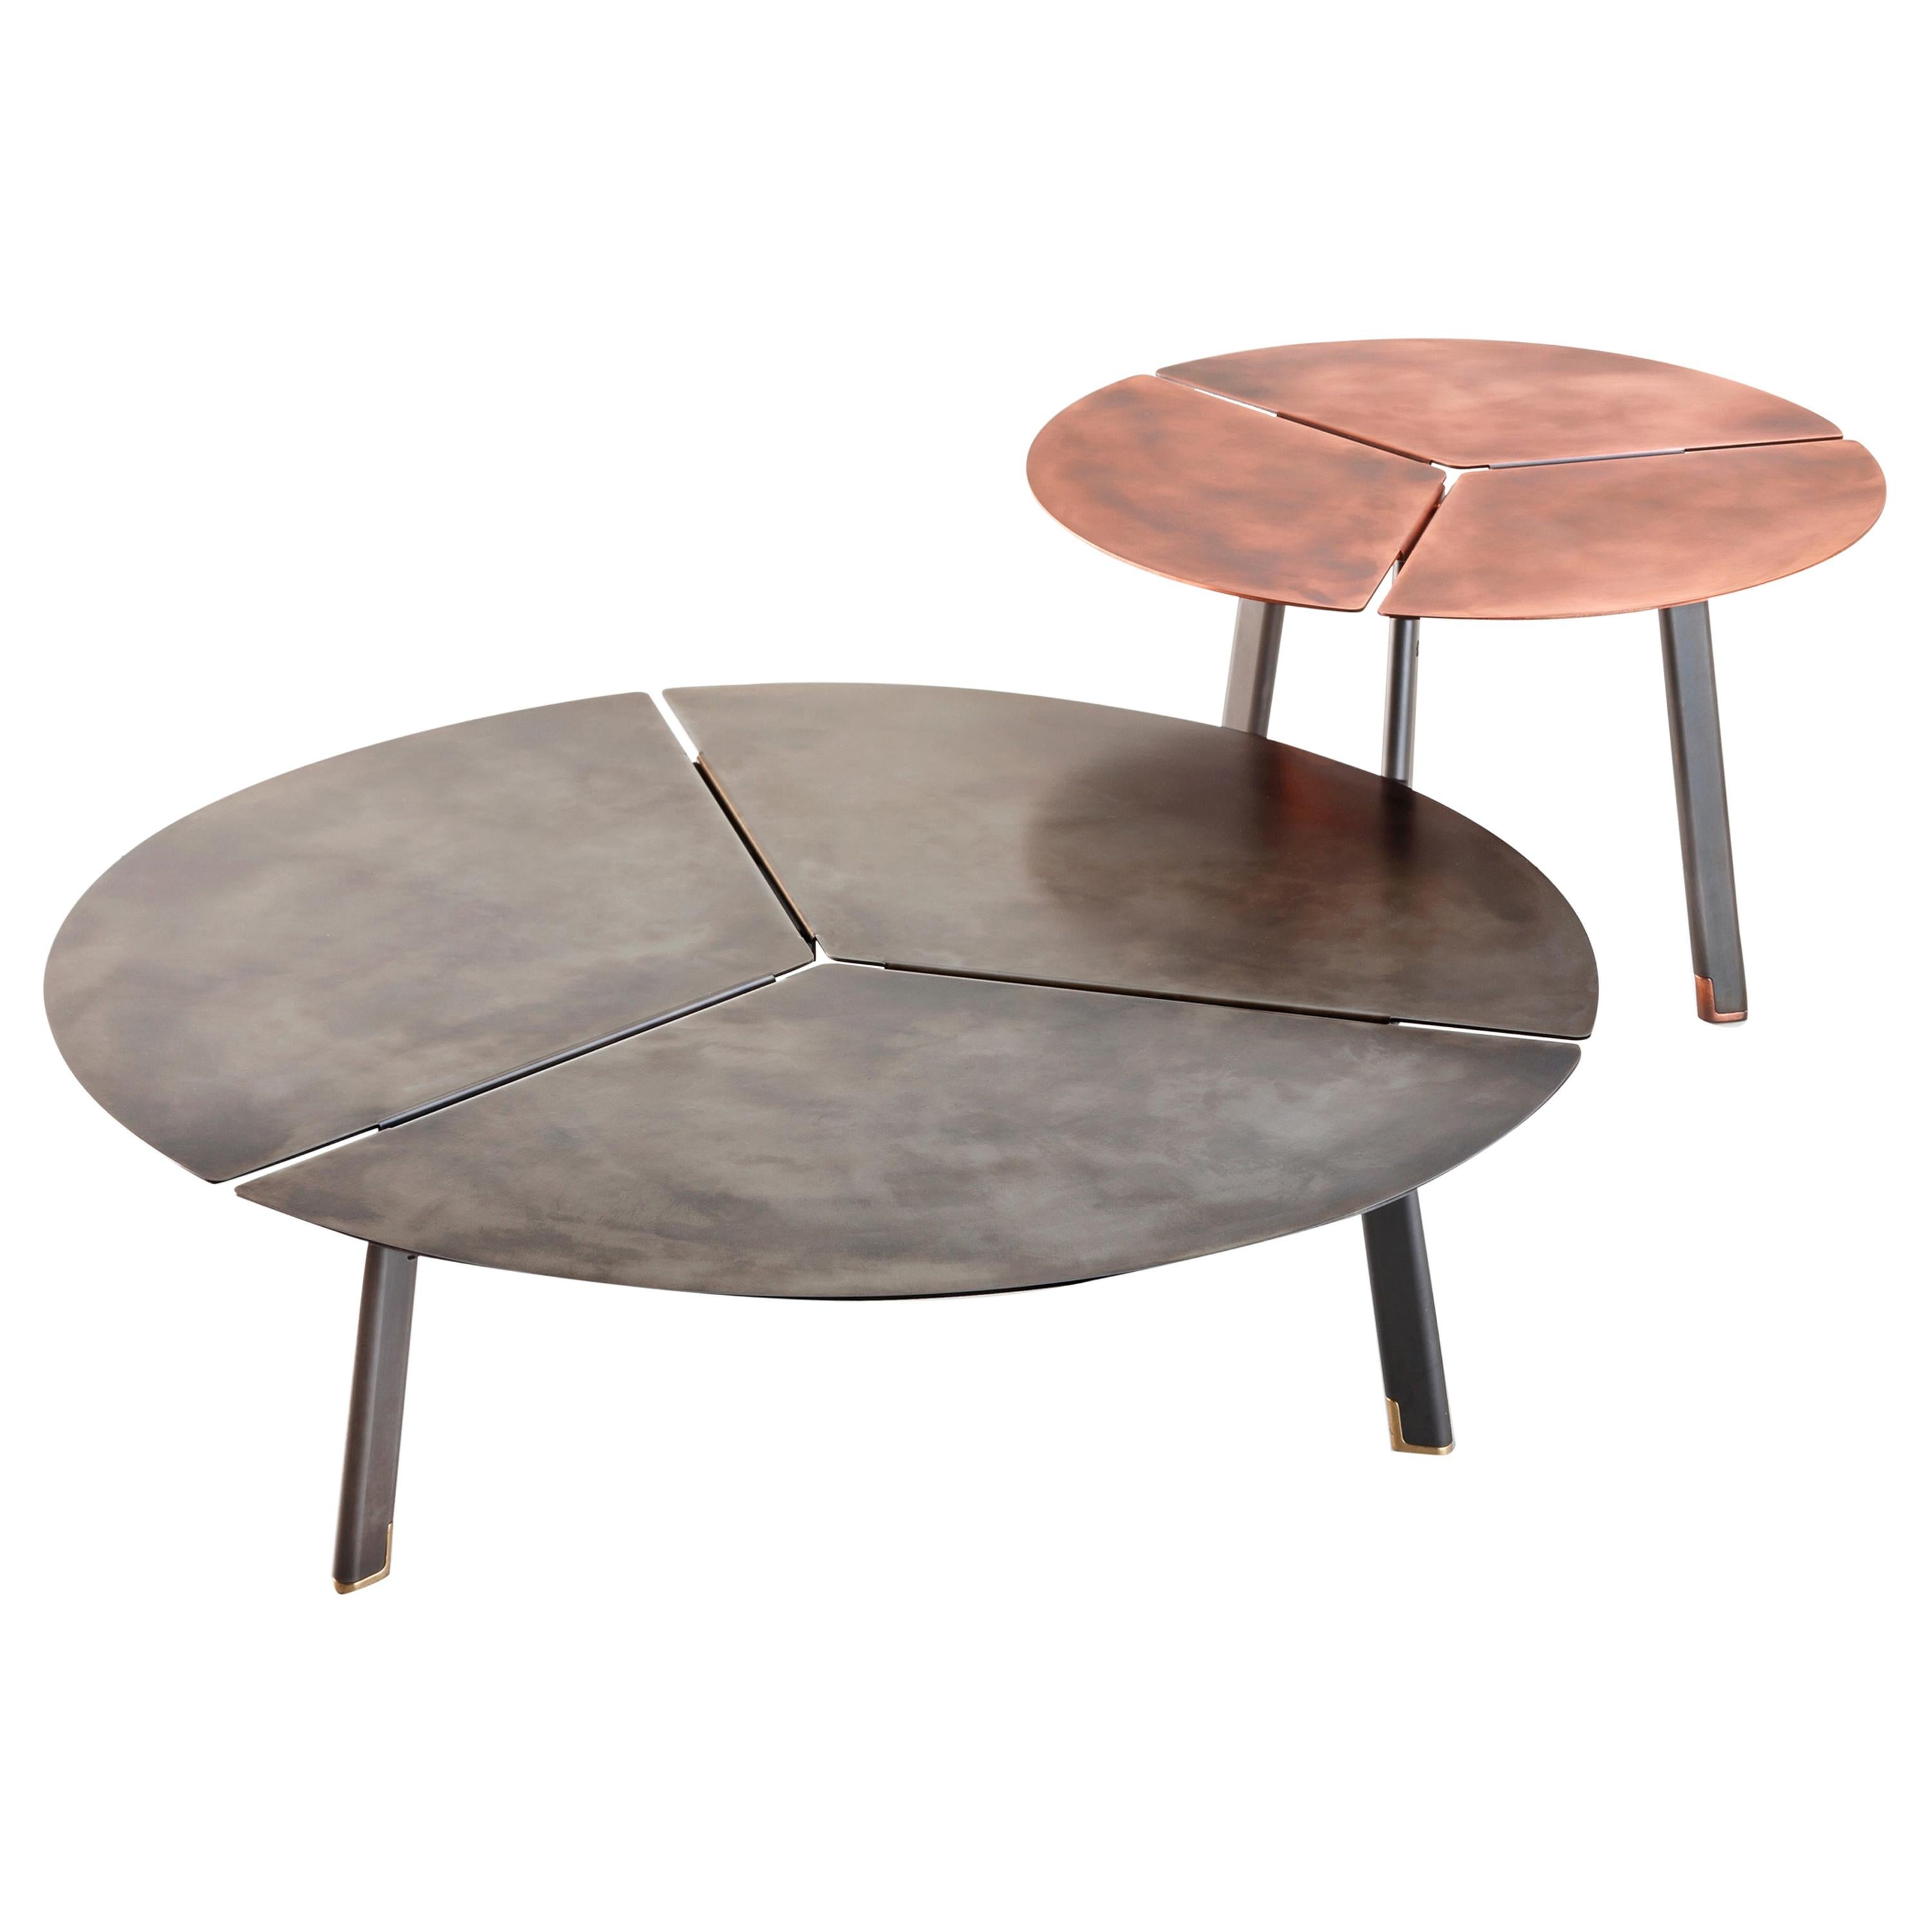 DeCastelli Placas Large Table in Stainless Steel by LucidiPevere